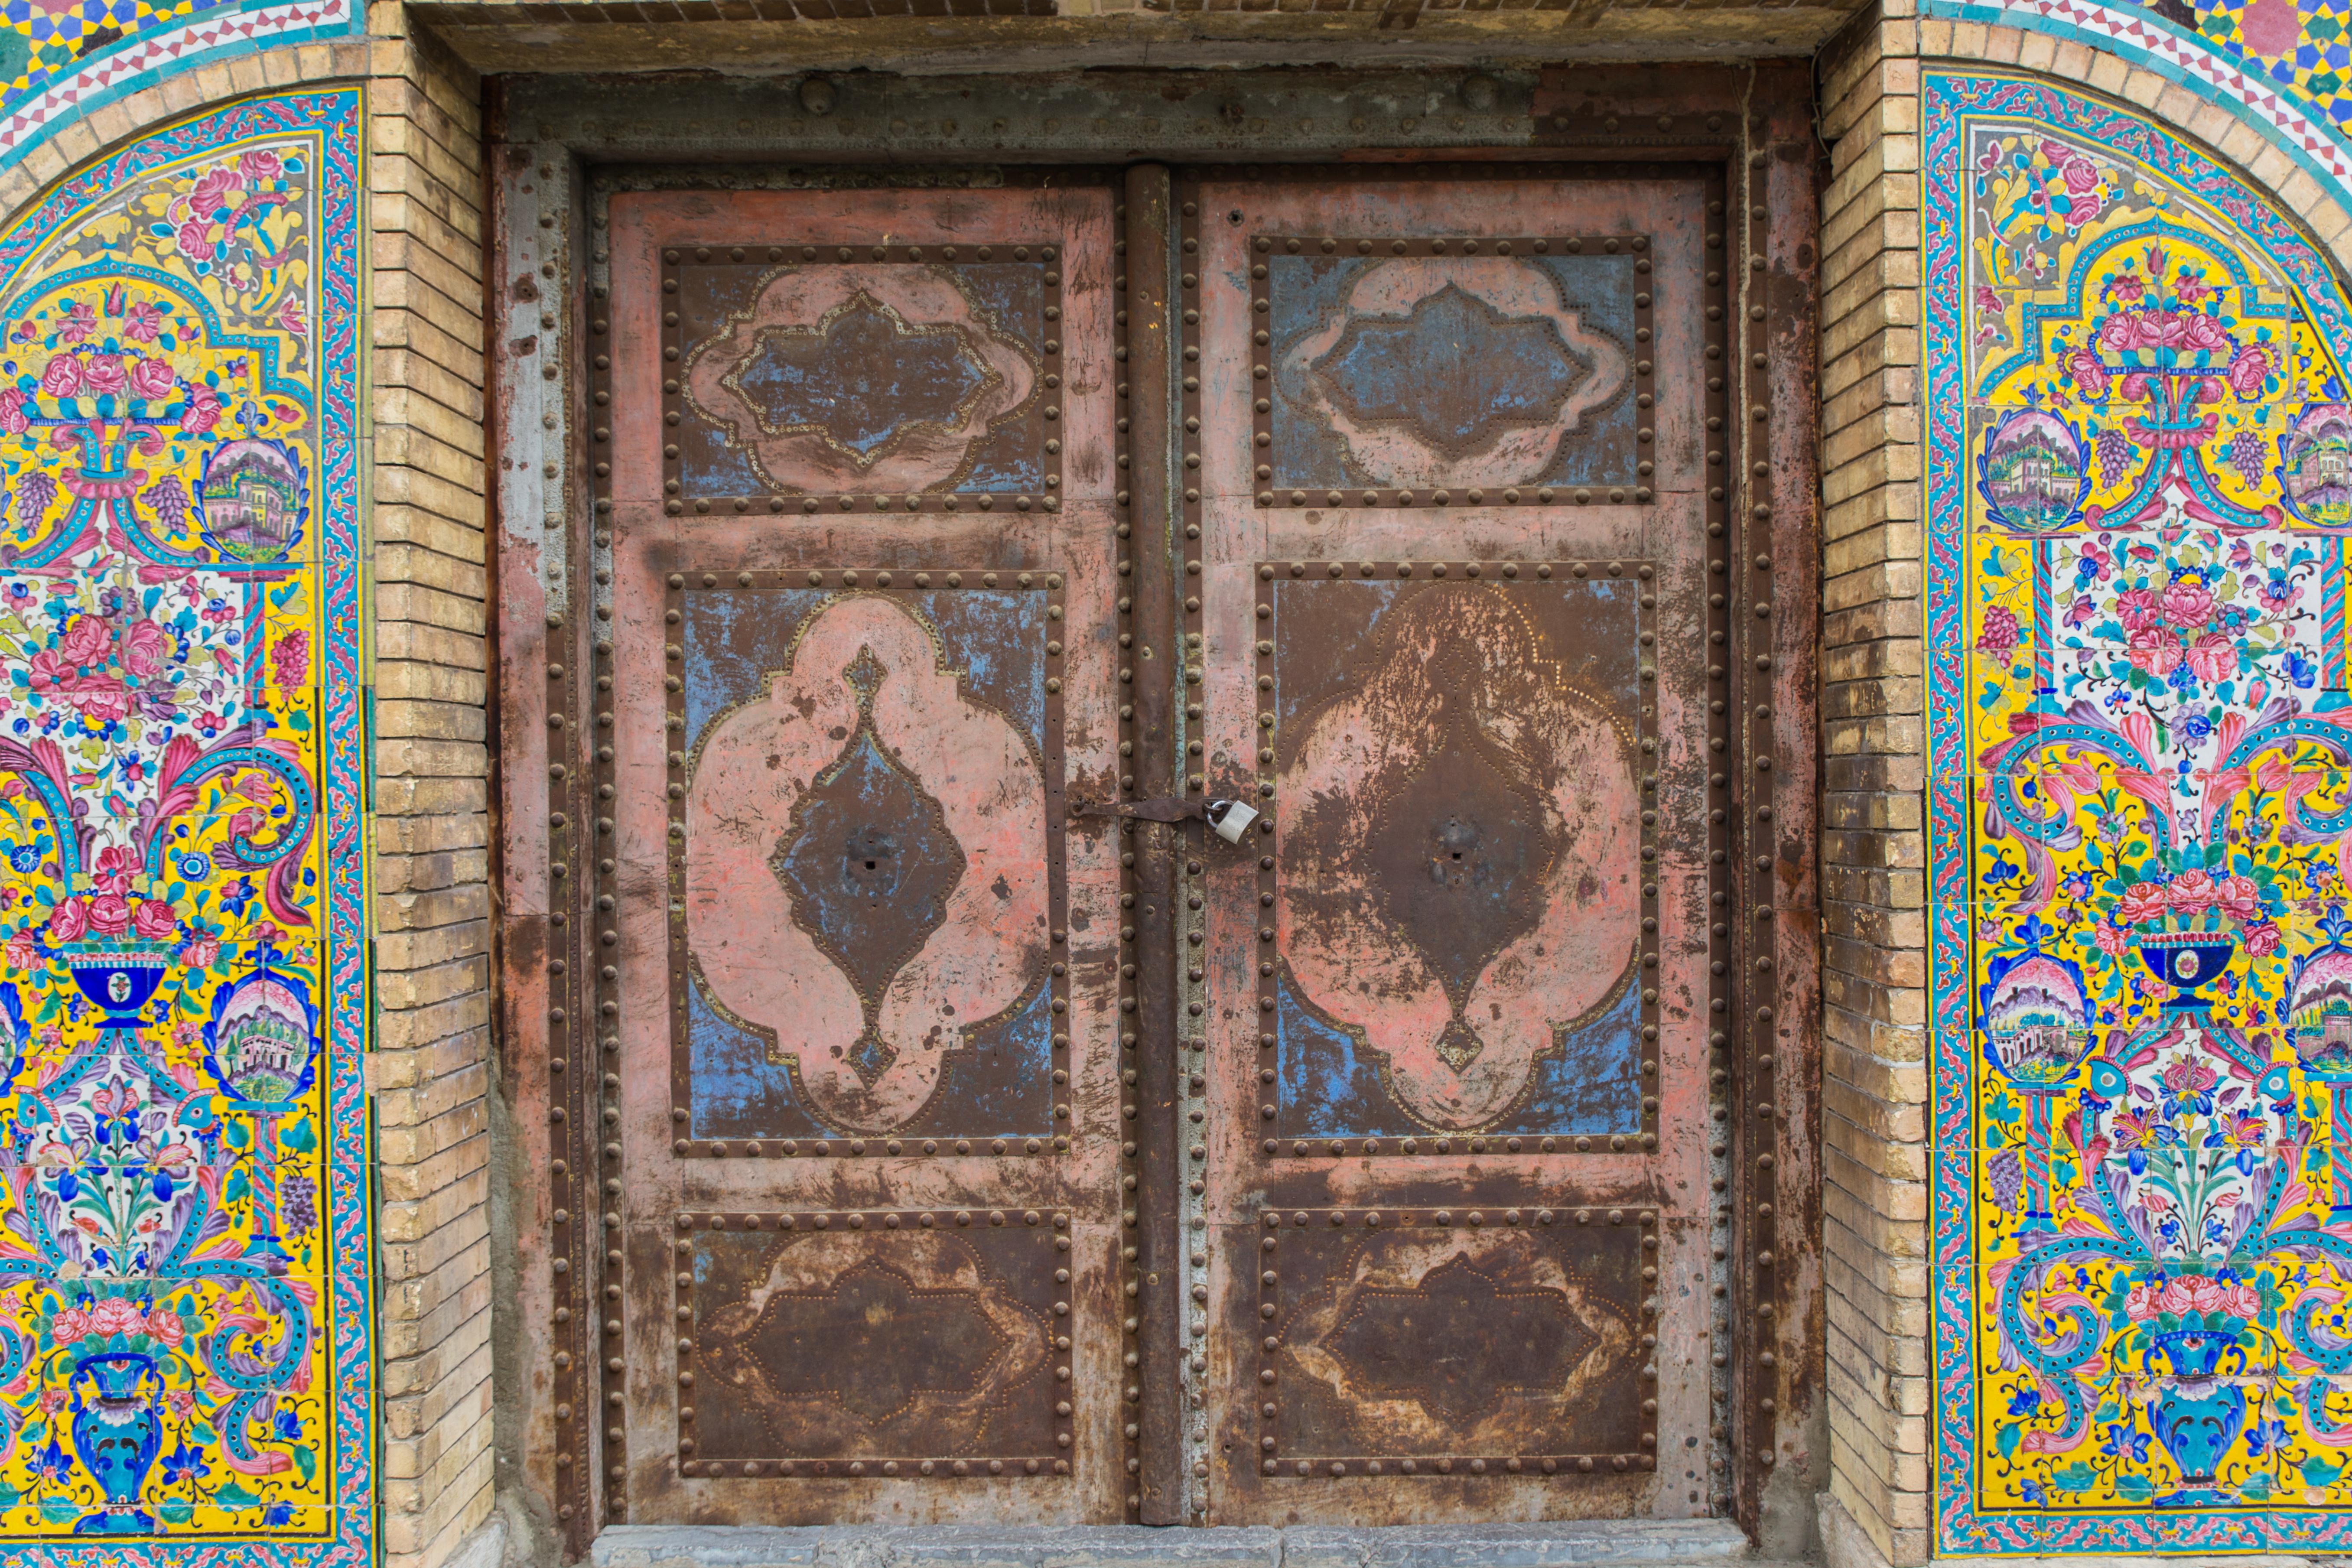 Intricate antique doors make an interesting contrast against the colorful tile © Anyabr / Shutterstock